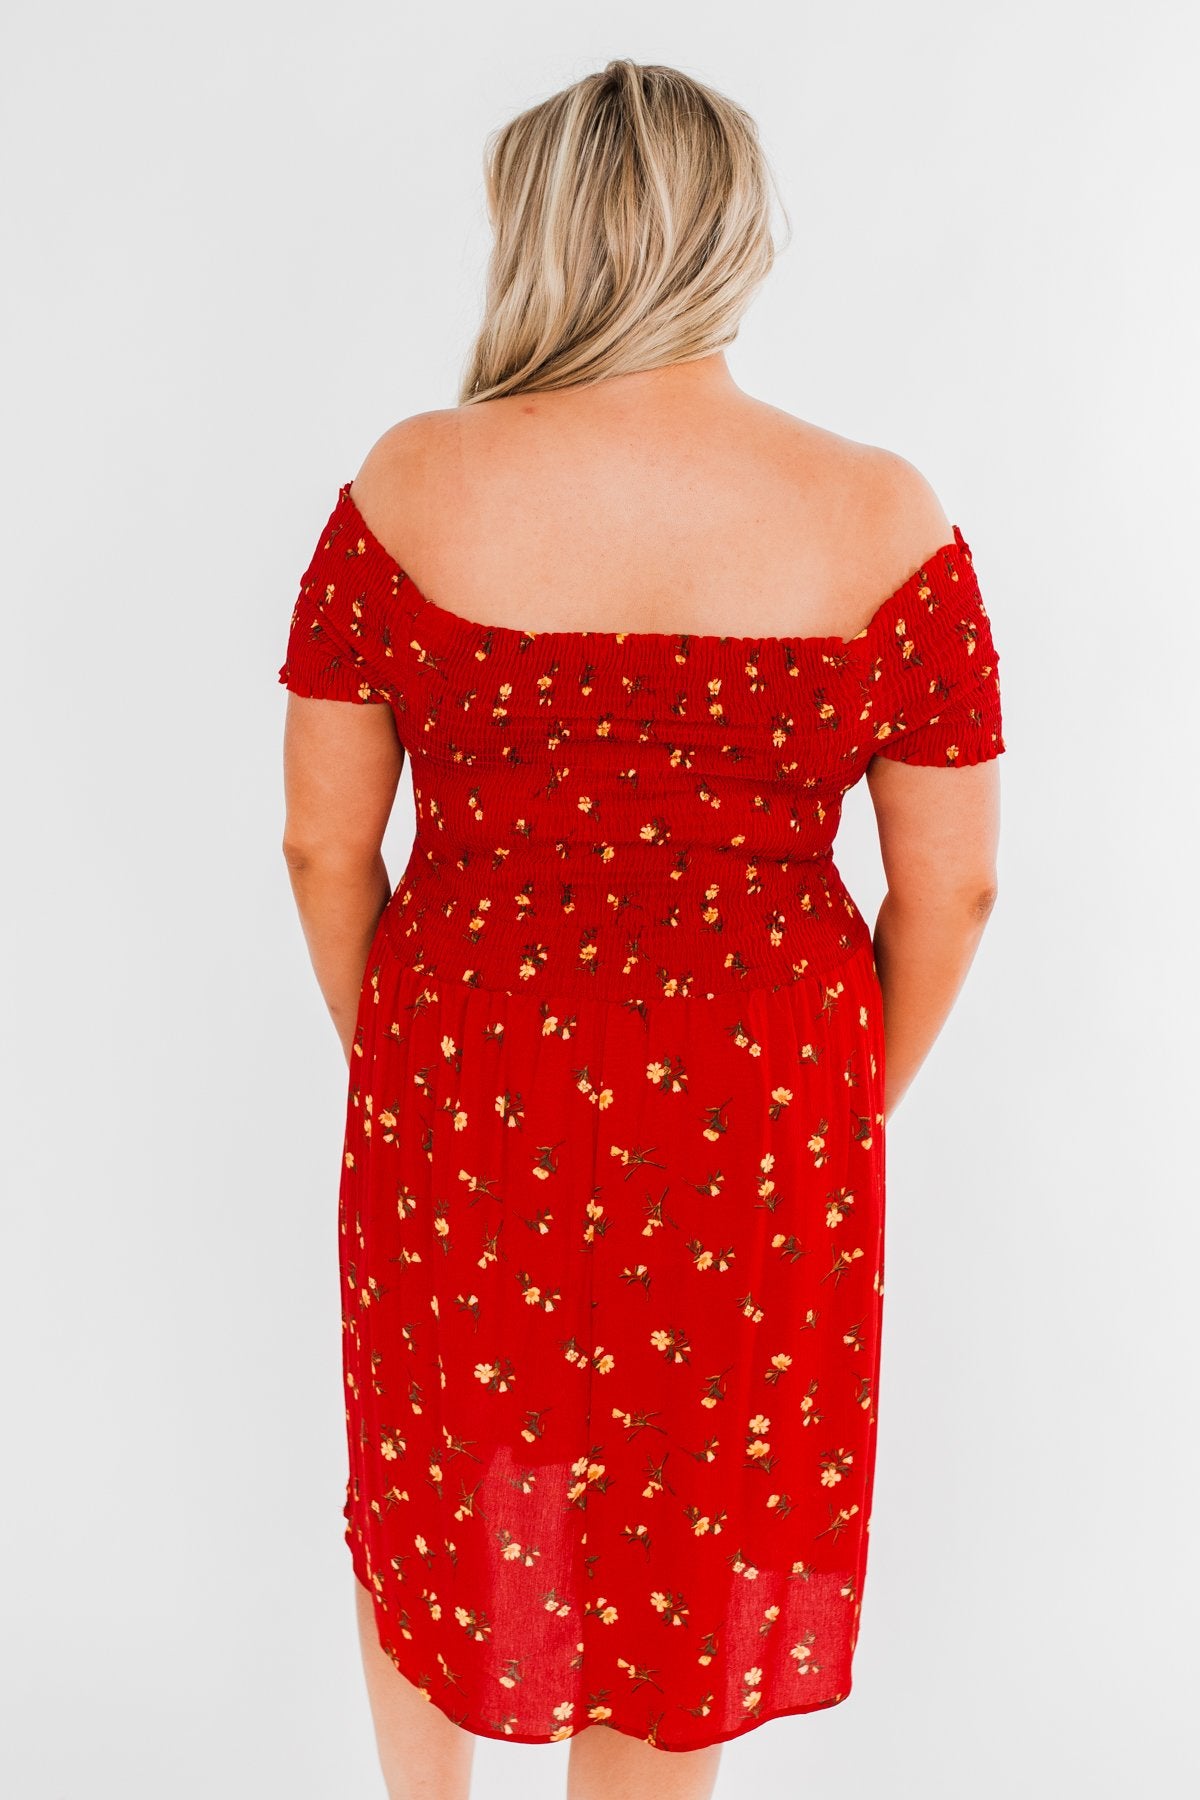 Dancing Through The Flowers Cinched Dress- Red